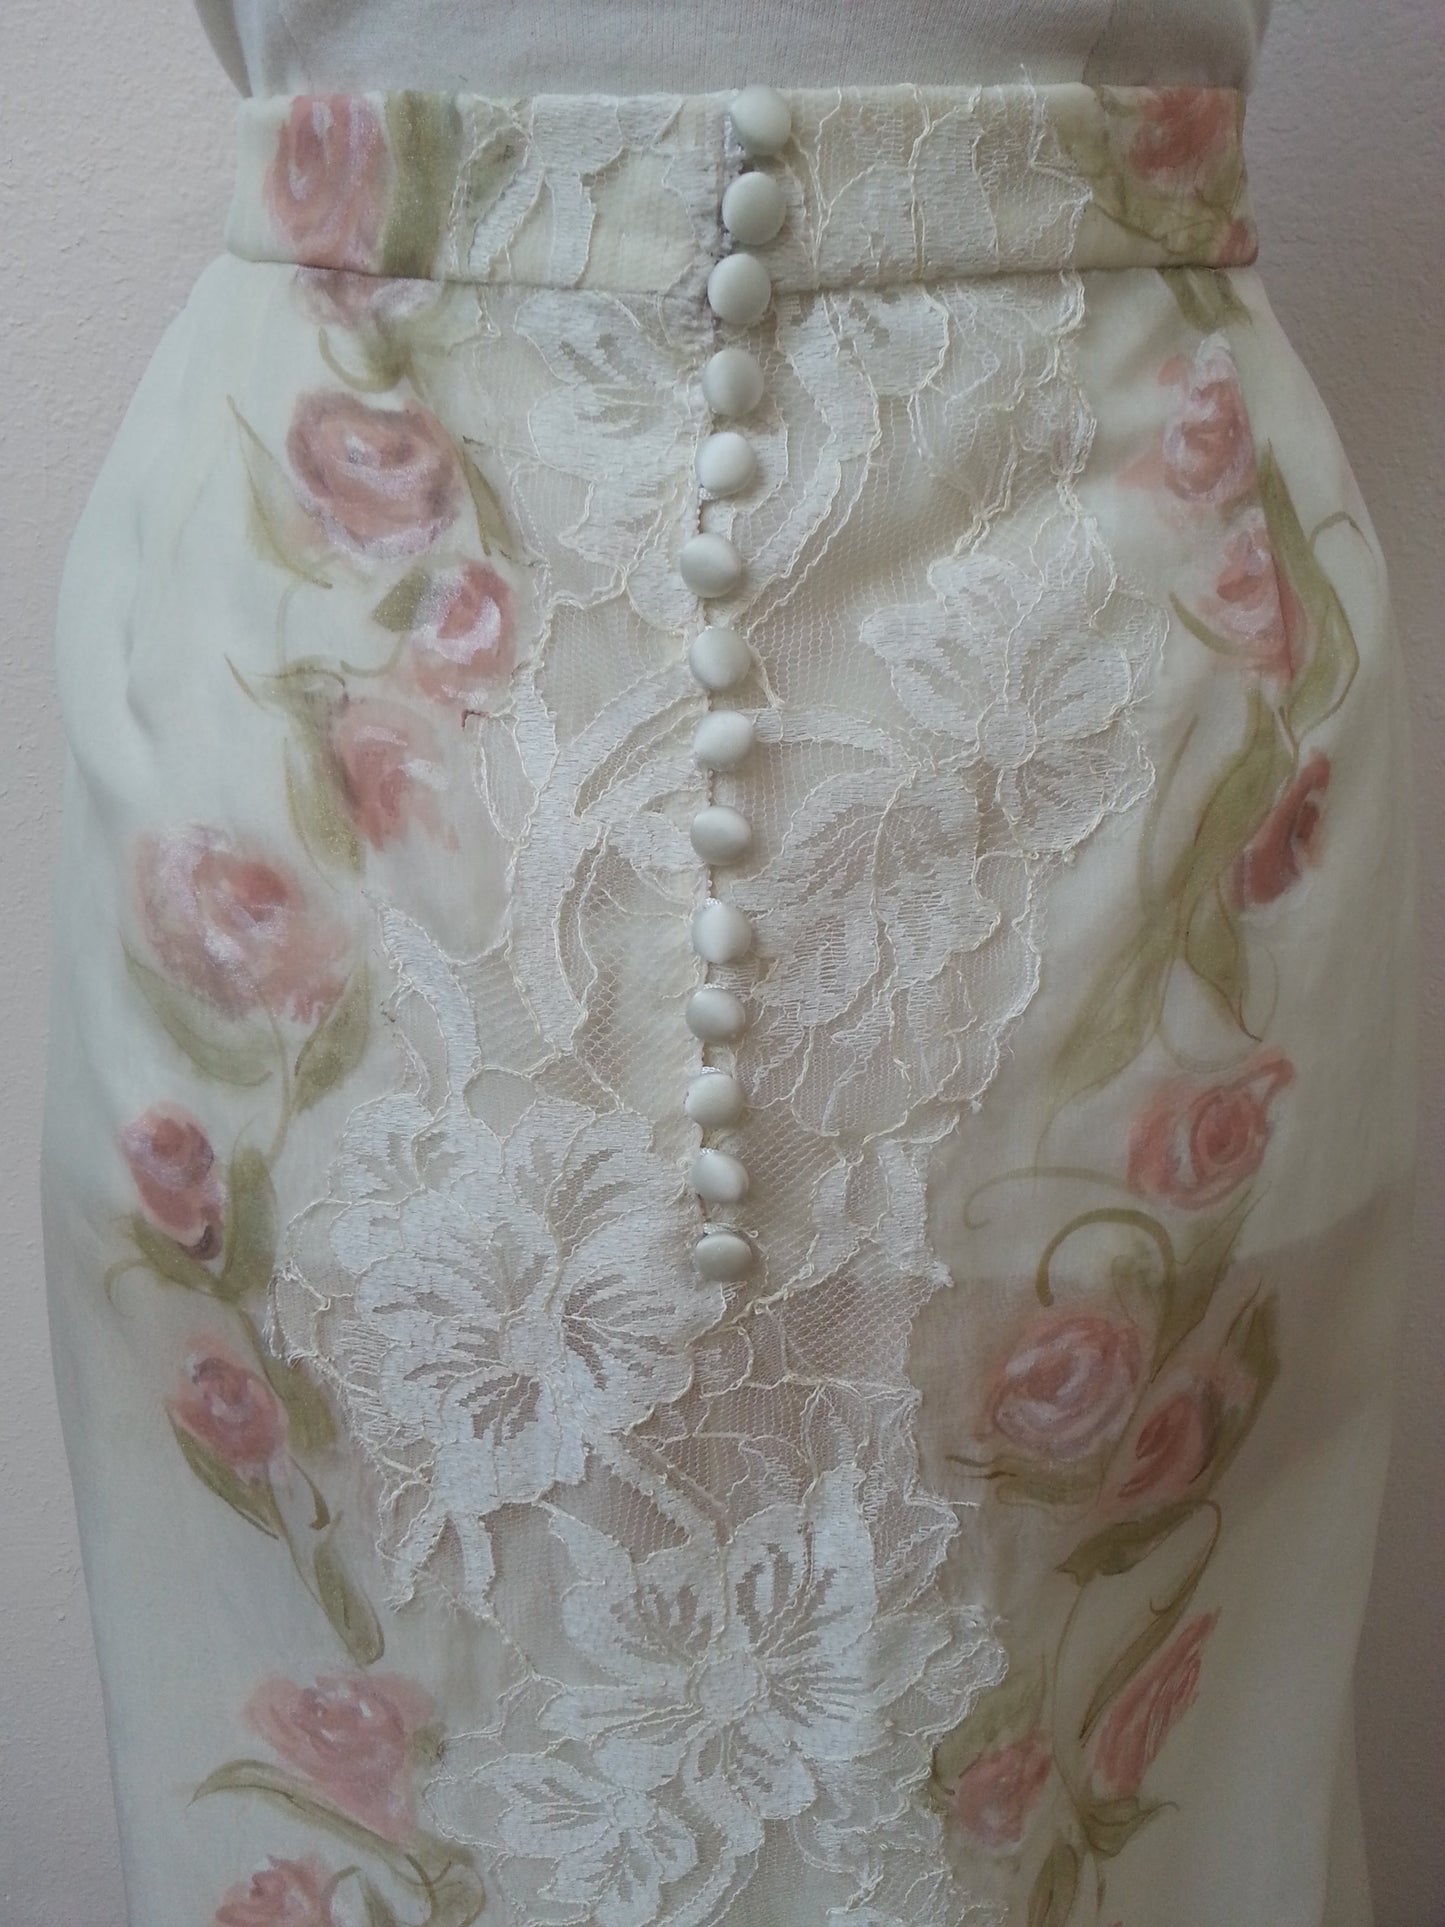 Handpainted bridal skirt with roses